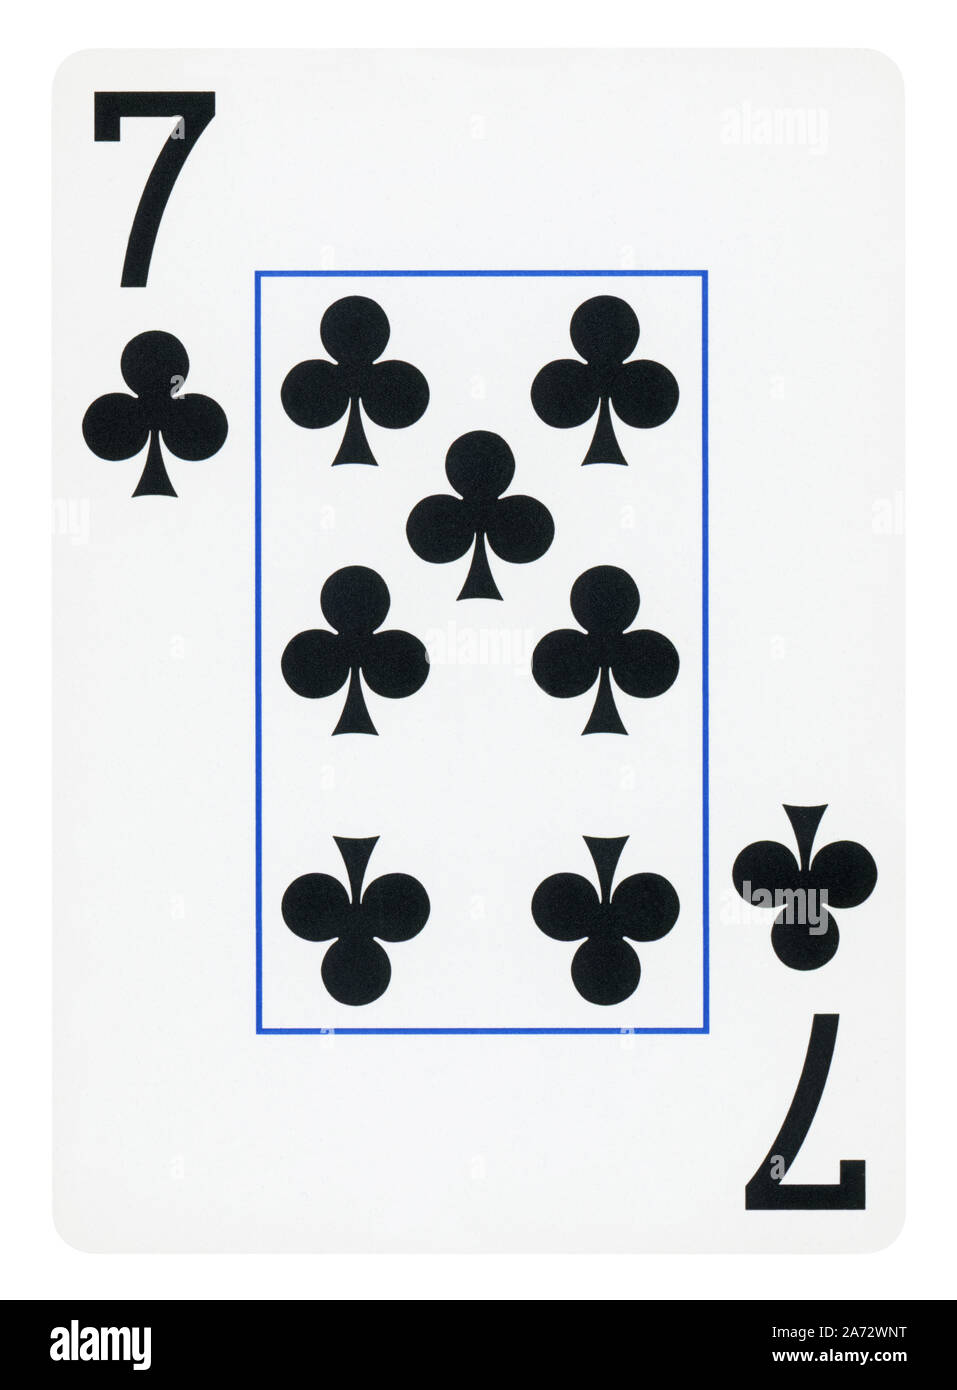 Seven of Clubs playing card - isolated on white (clipping path included) Stock Photo